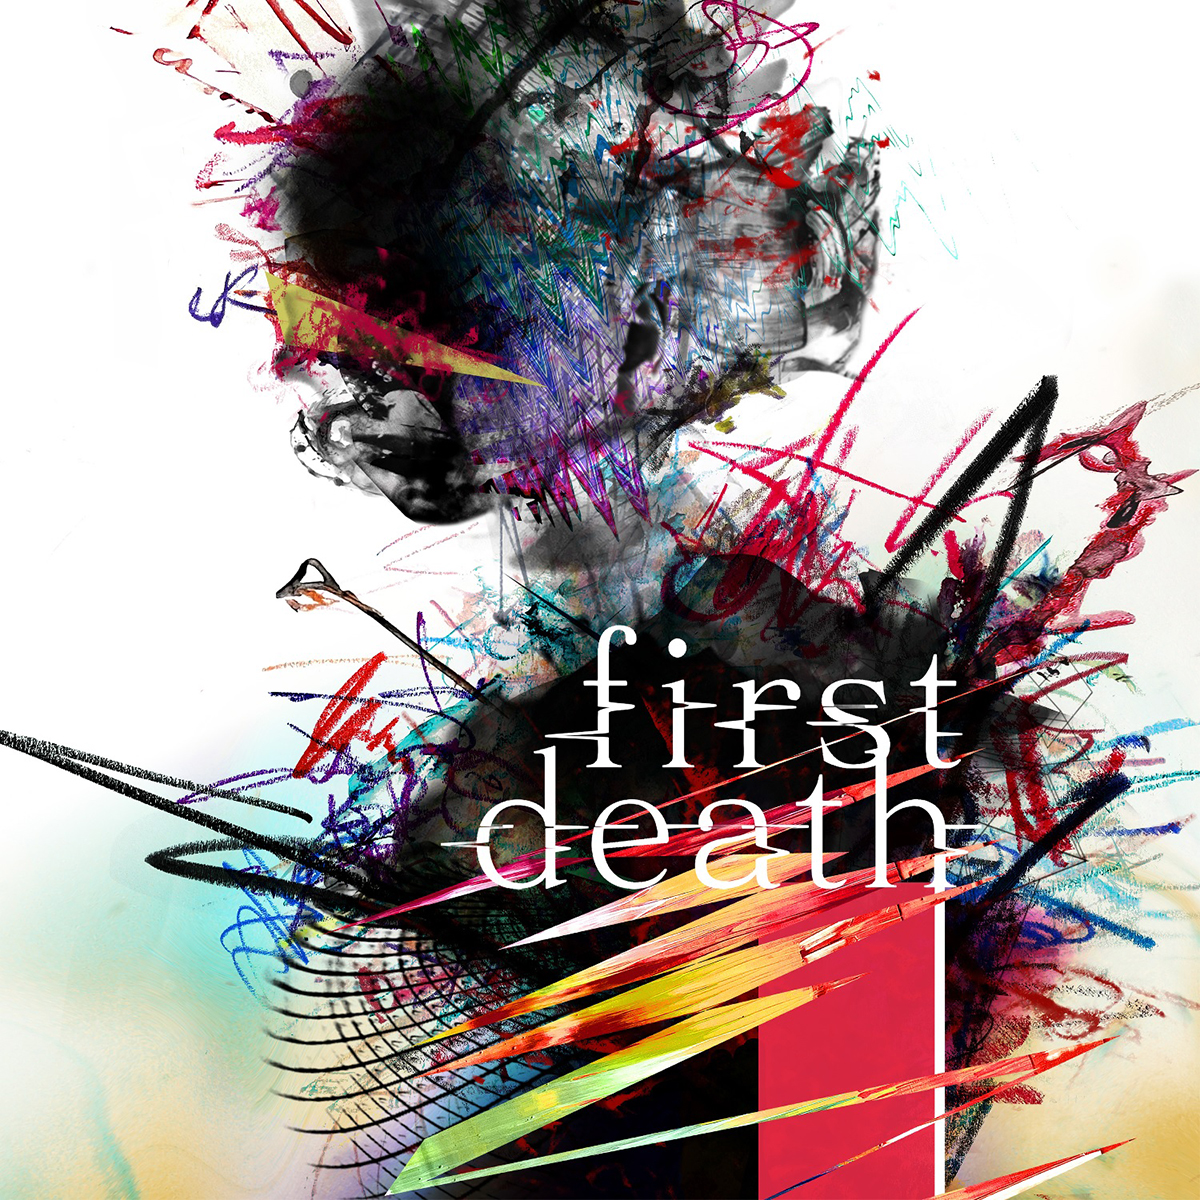 TK from 凛として時雨、『チェンソーマン』ED「first death」配信